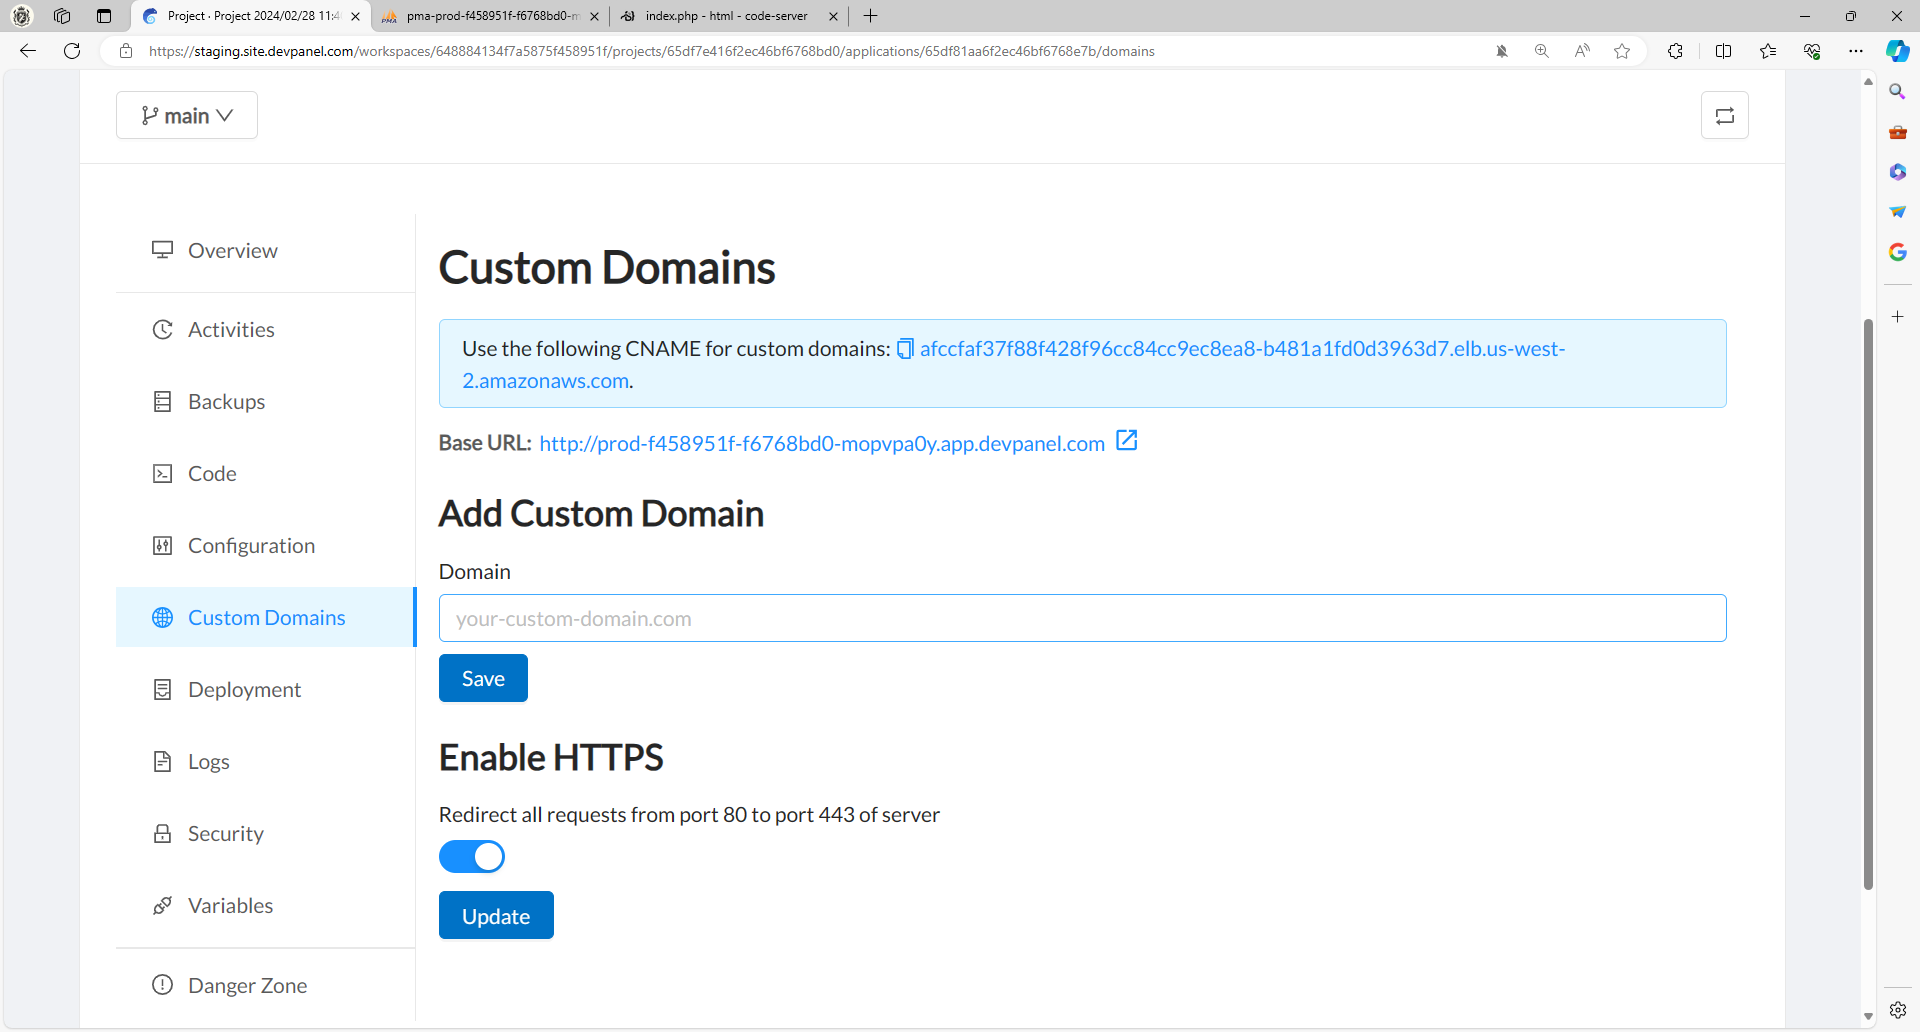 Connect one or more custom domains to your site